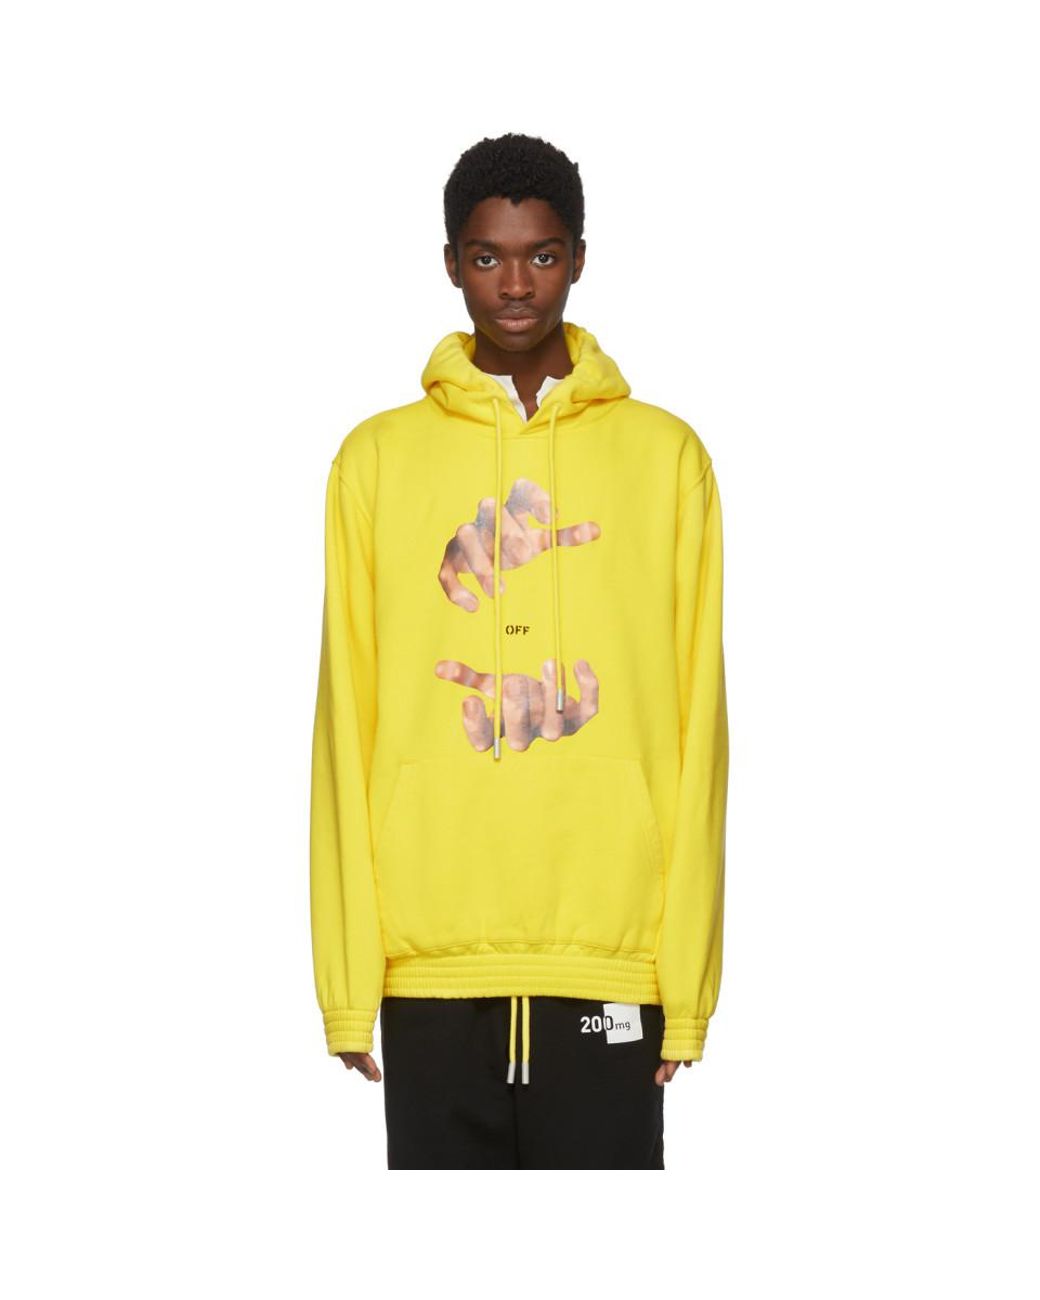 Off-White c/o Virgil Abloh 'hands' Hoodie in Yellow for Men